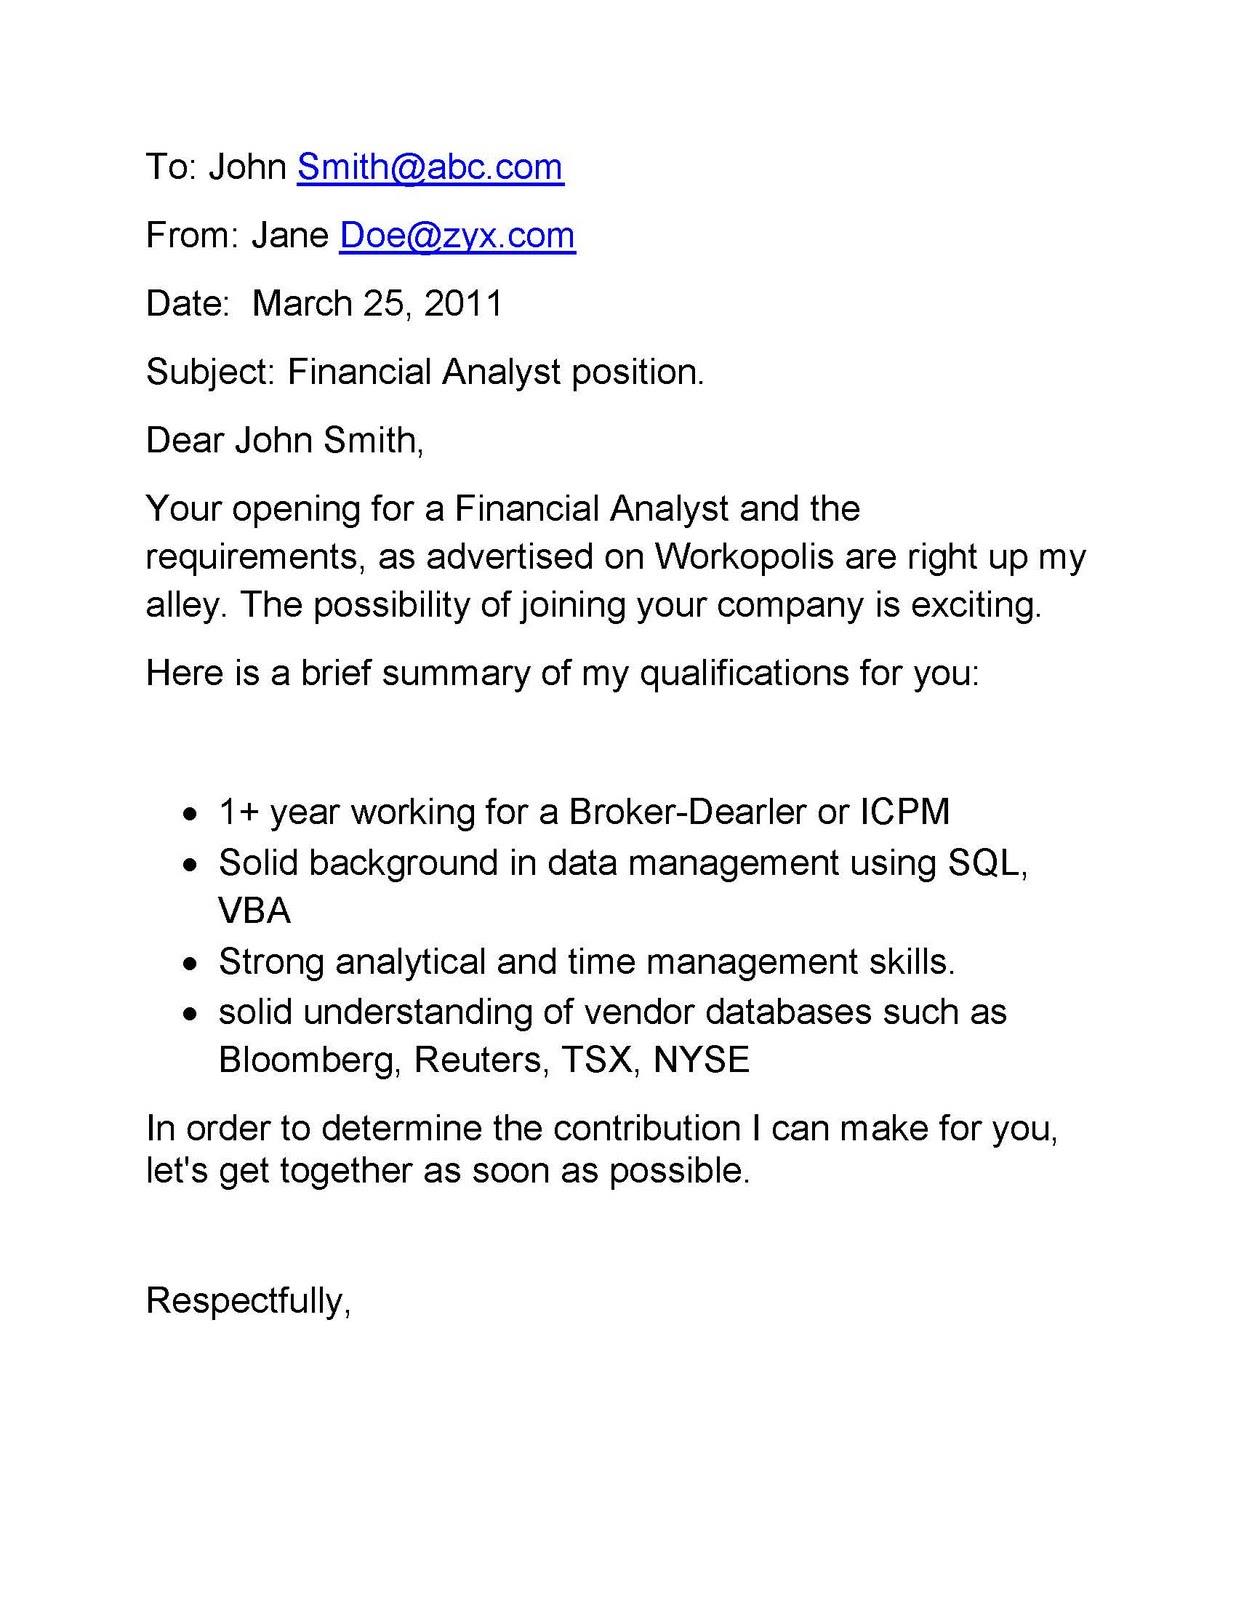 Sample job application email cover letter attached